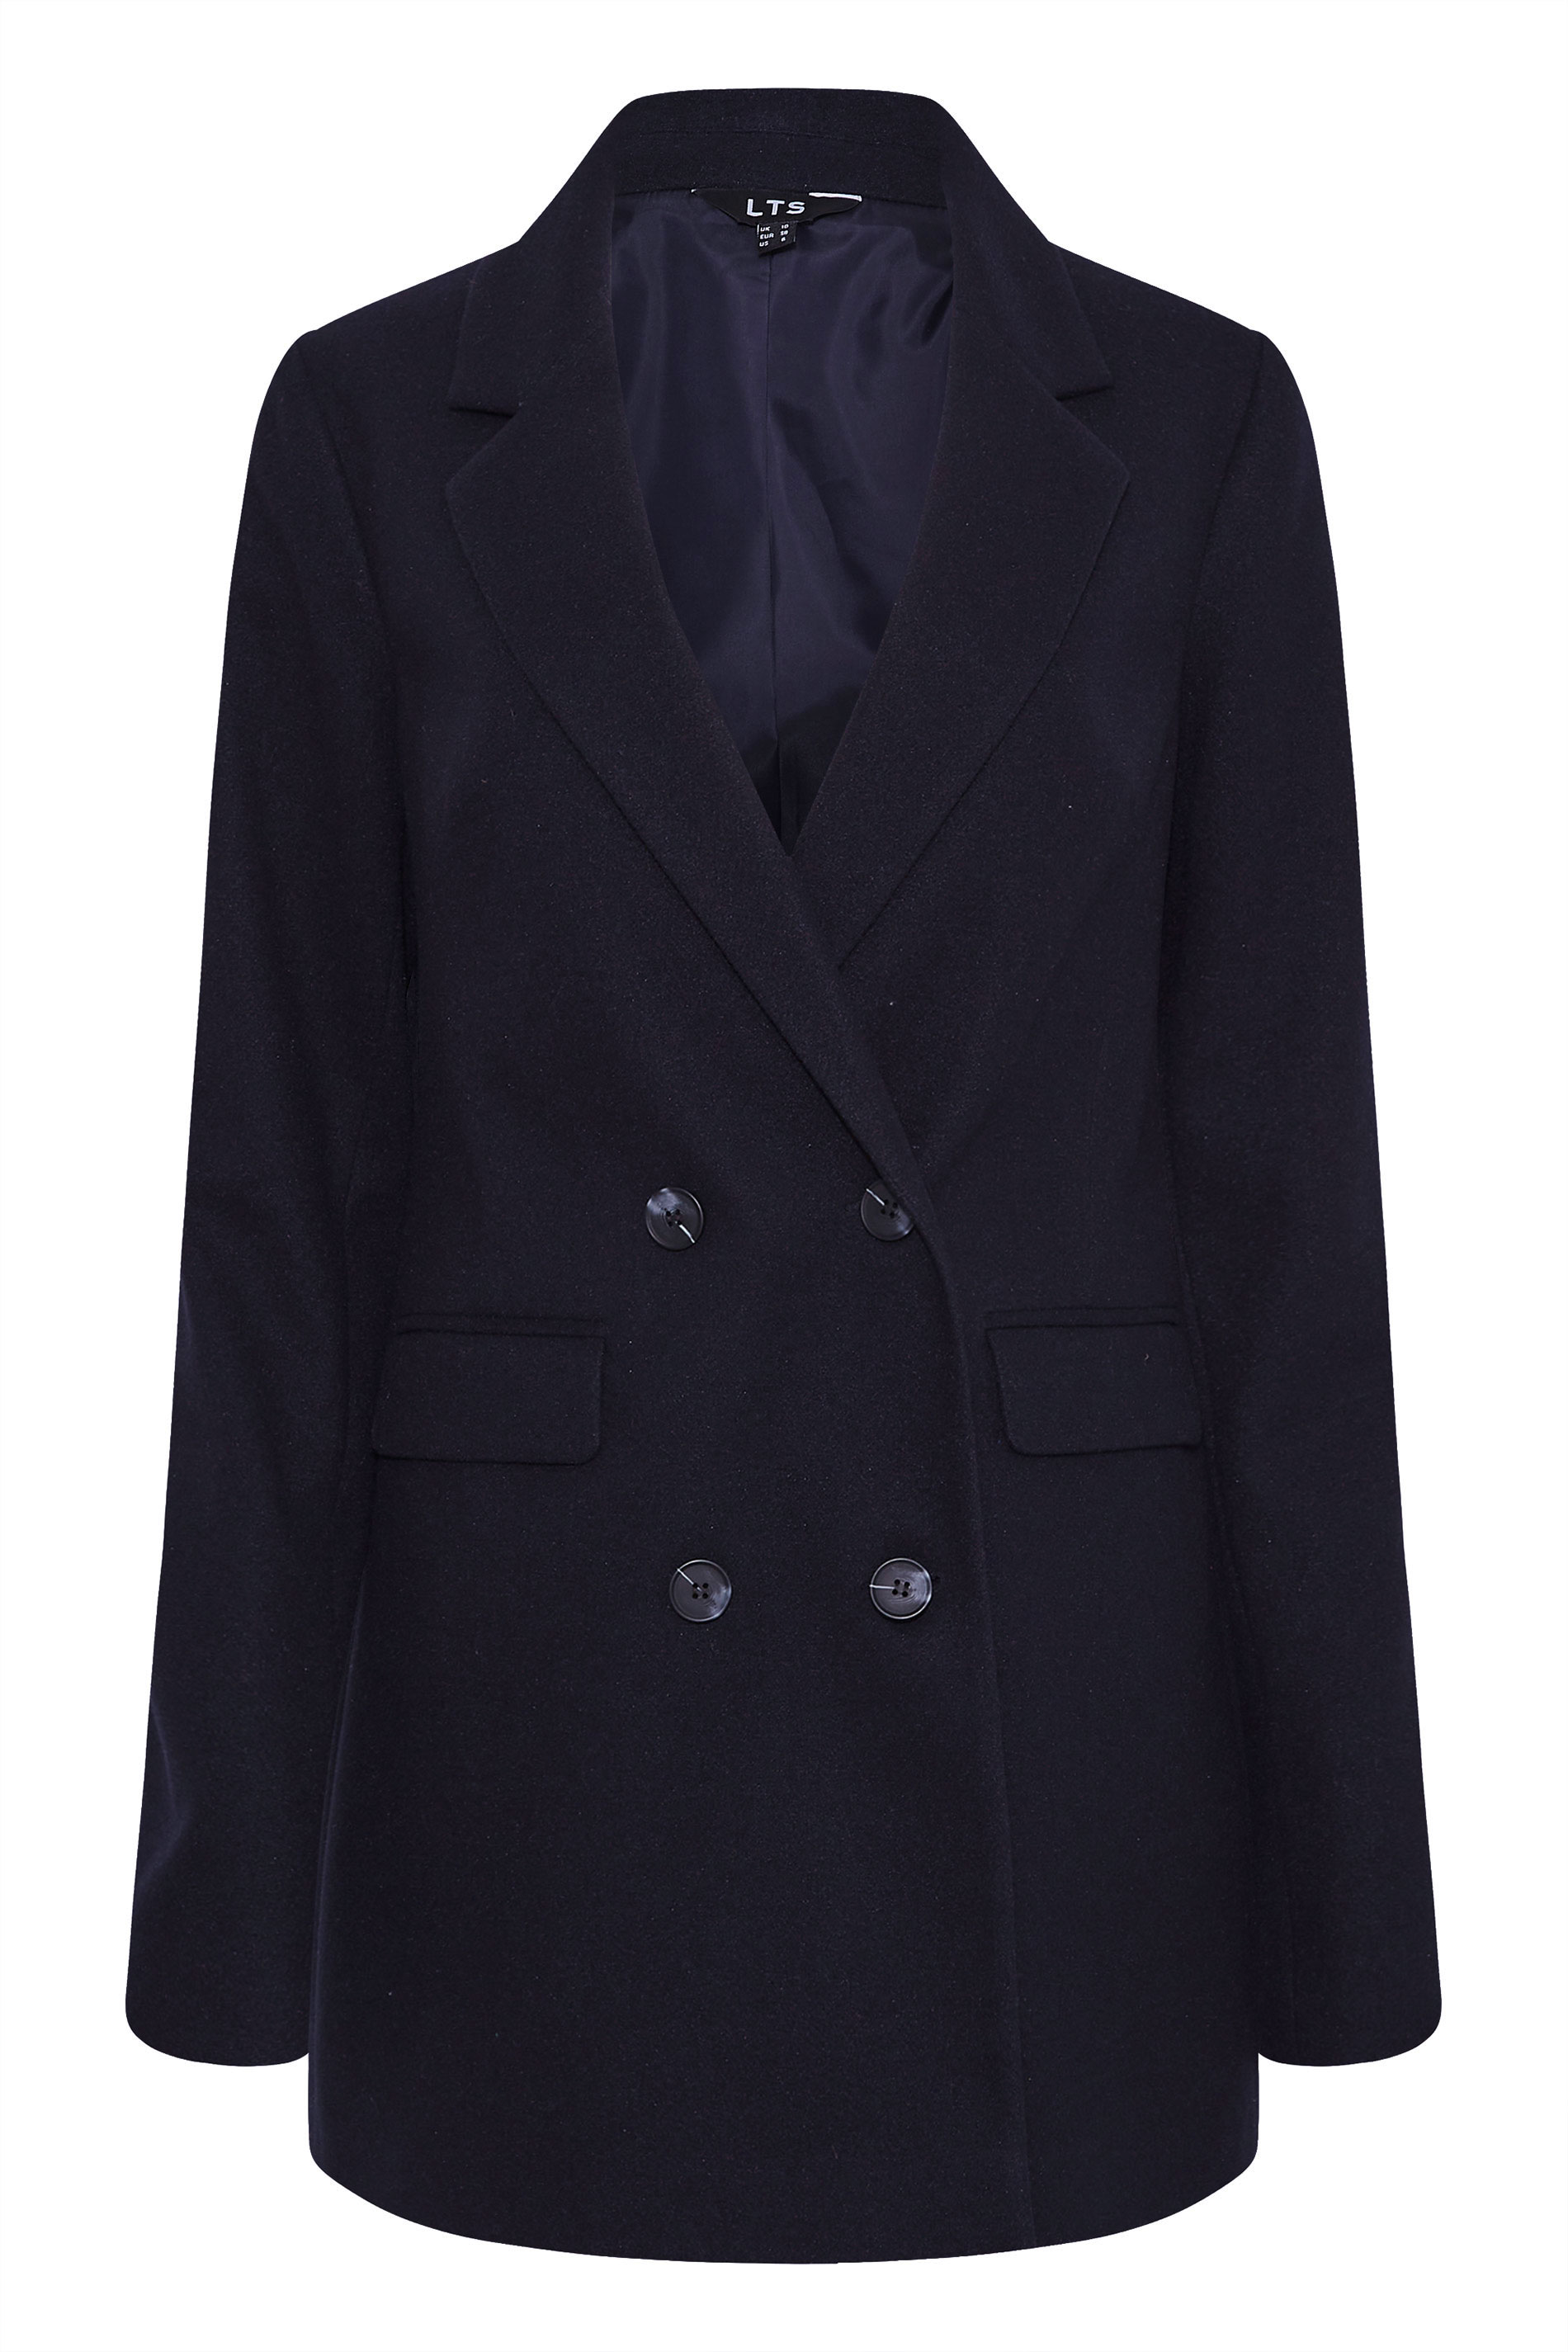 LTS Tall Women's Navy Blue Double Breasted Brushed Jacket | Long Tall Sally 2